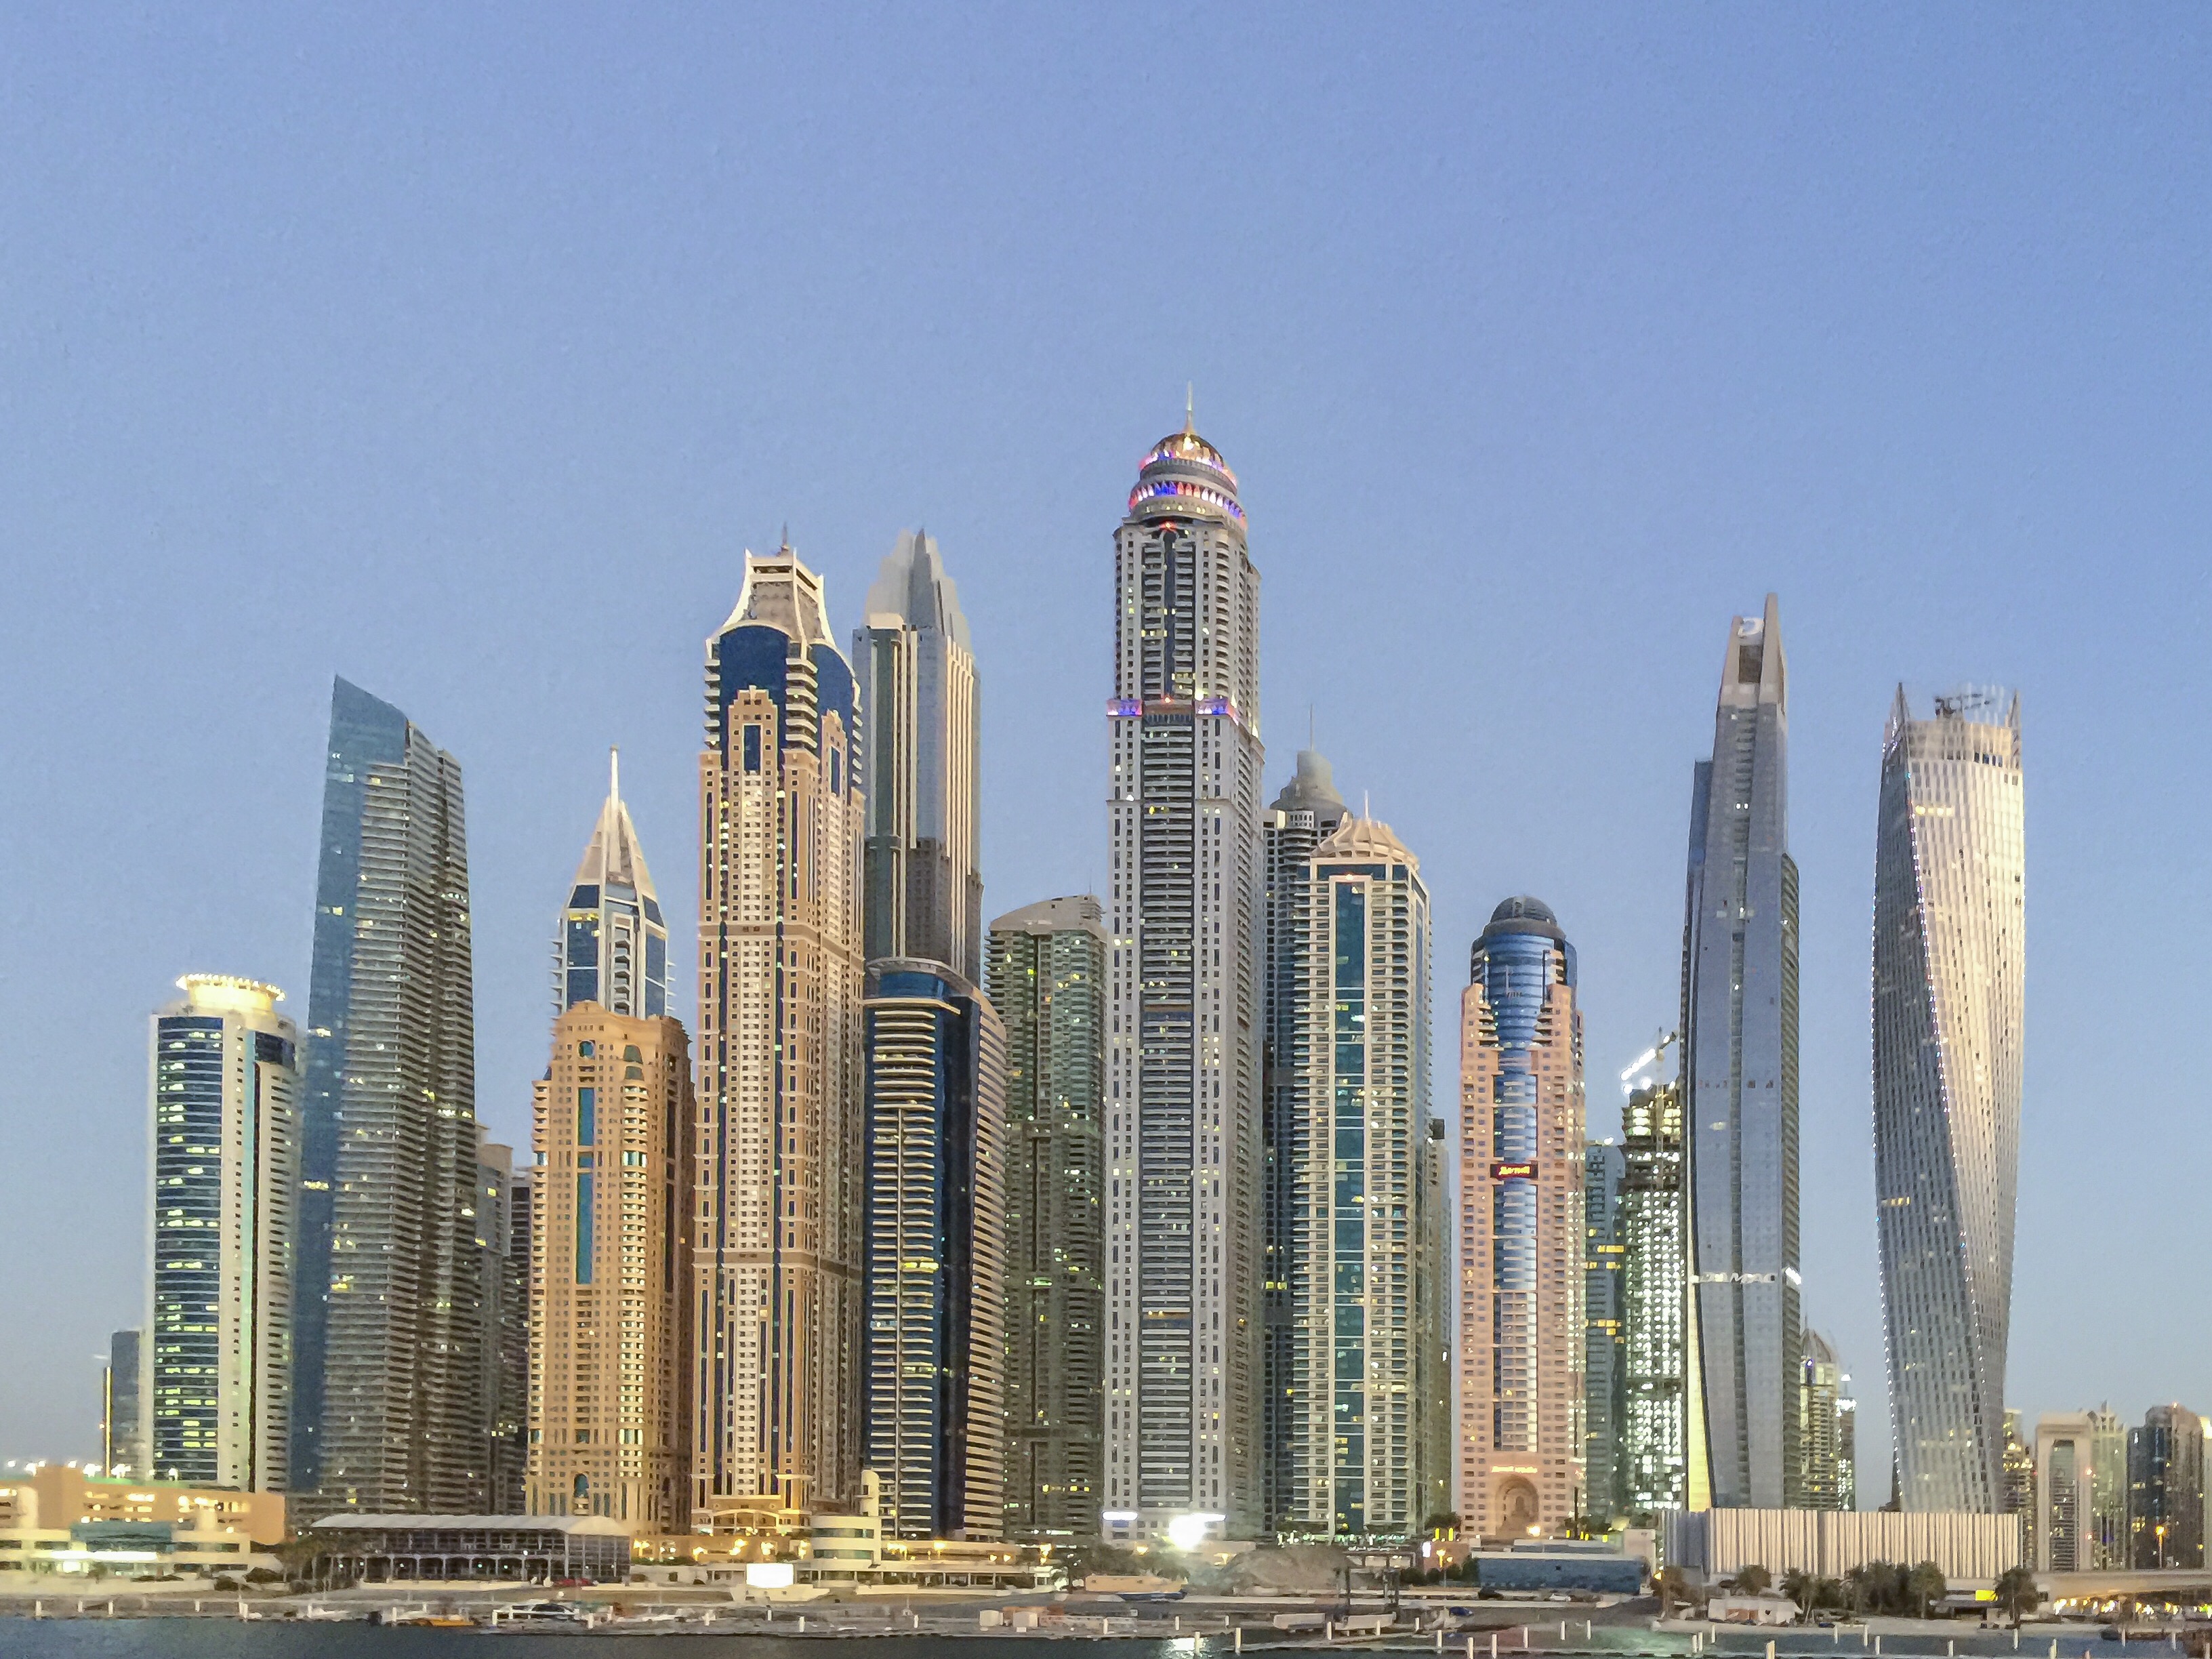 Value of real estate transactions in Dubai reached Dhs1.5 billion